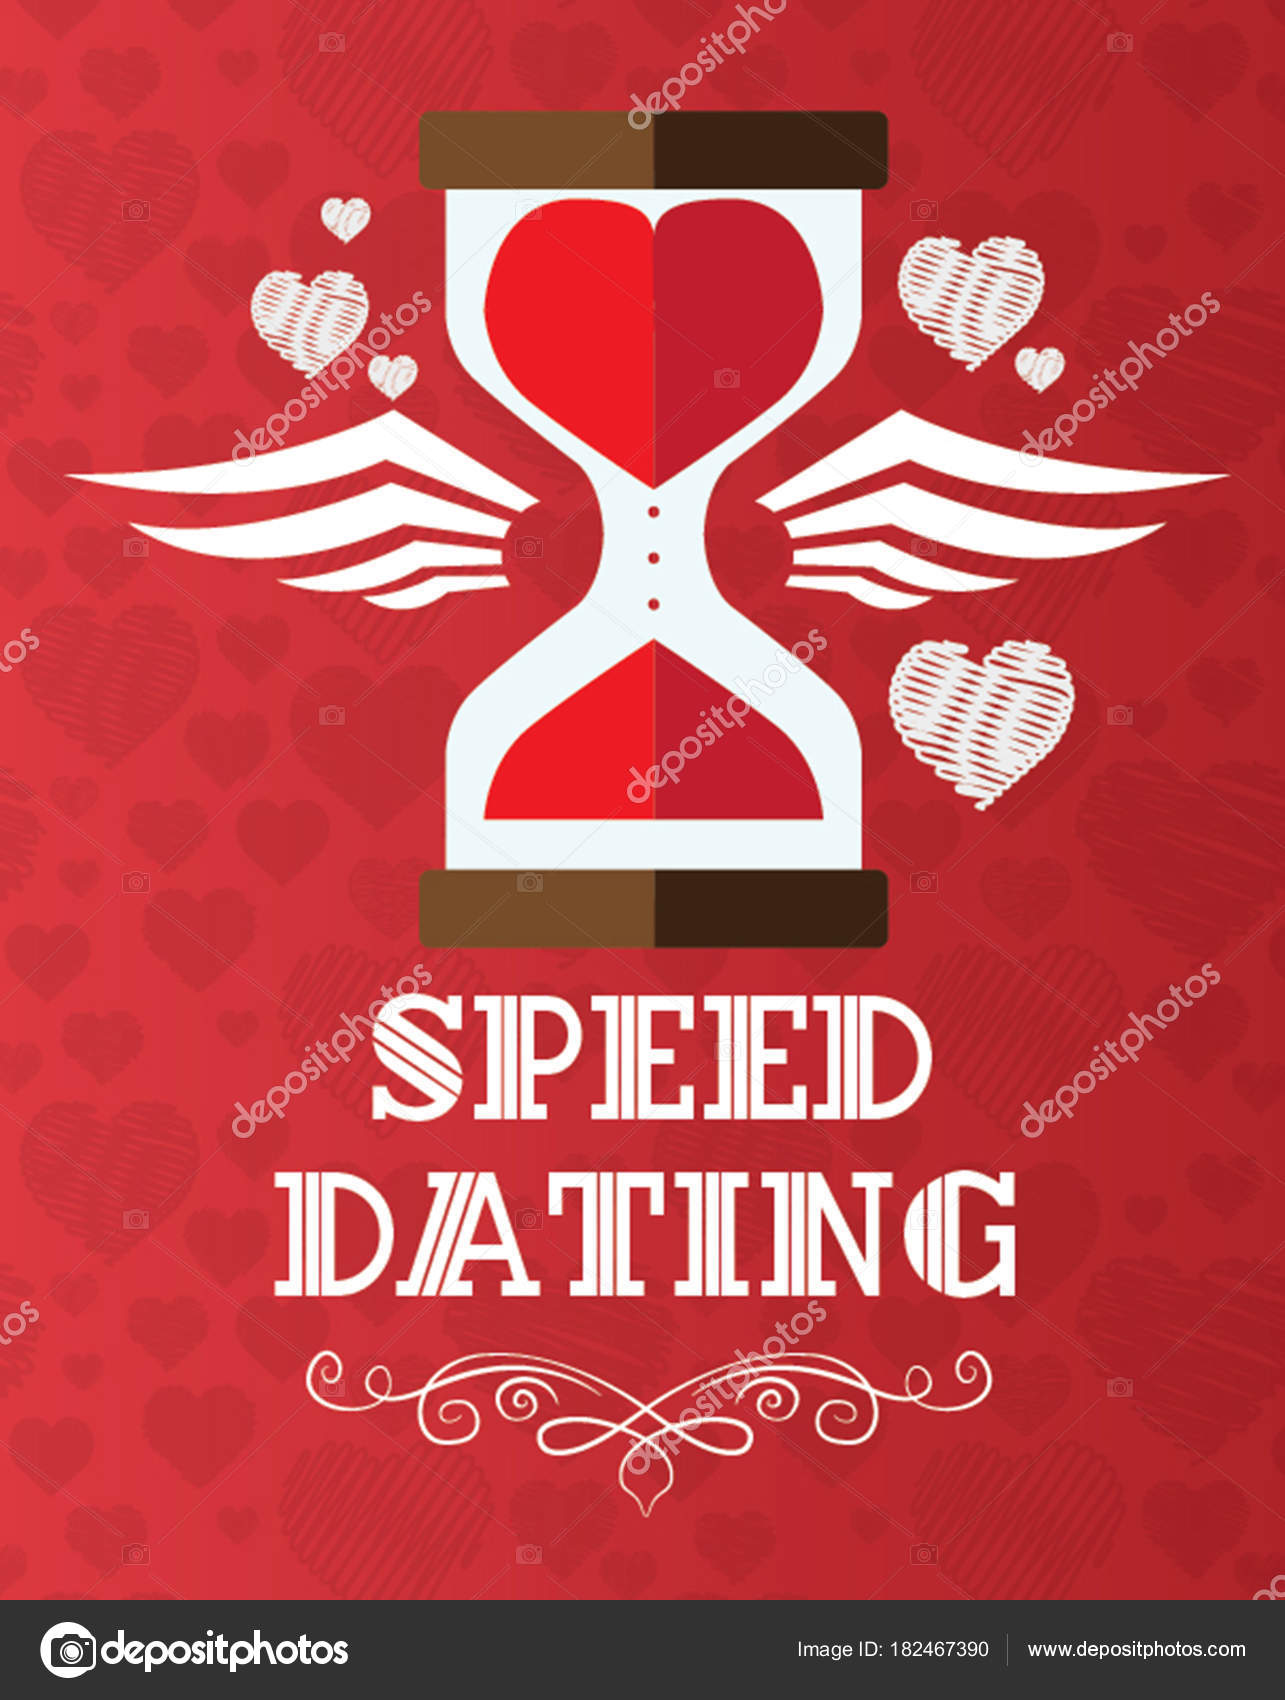 sula speed dating norway